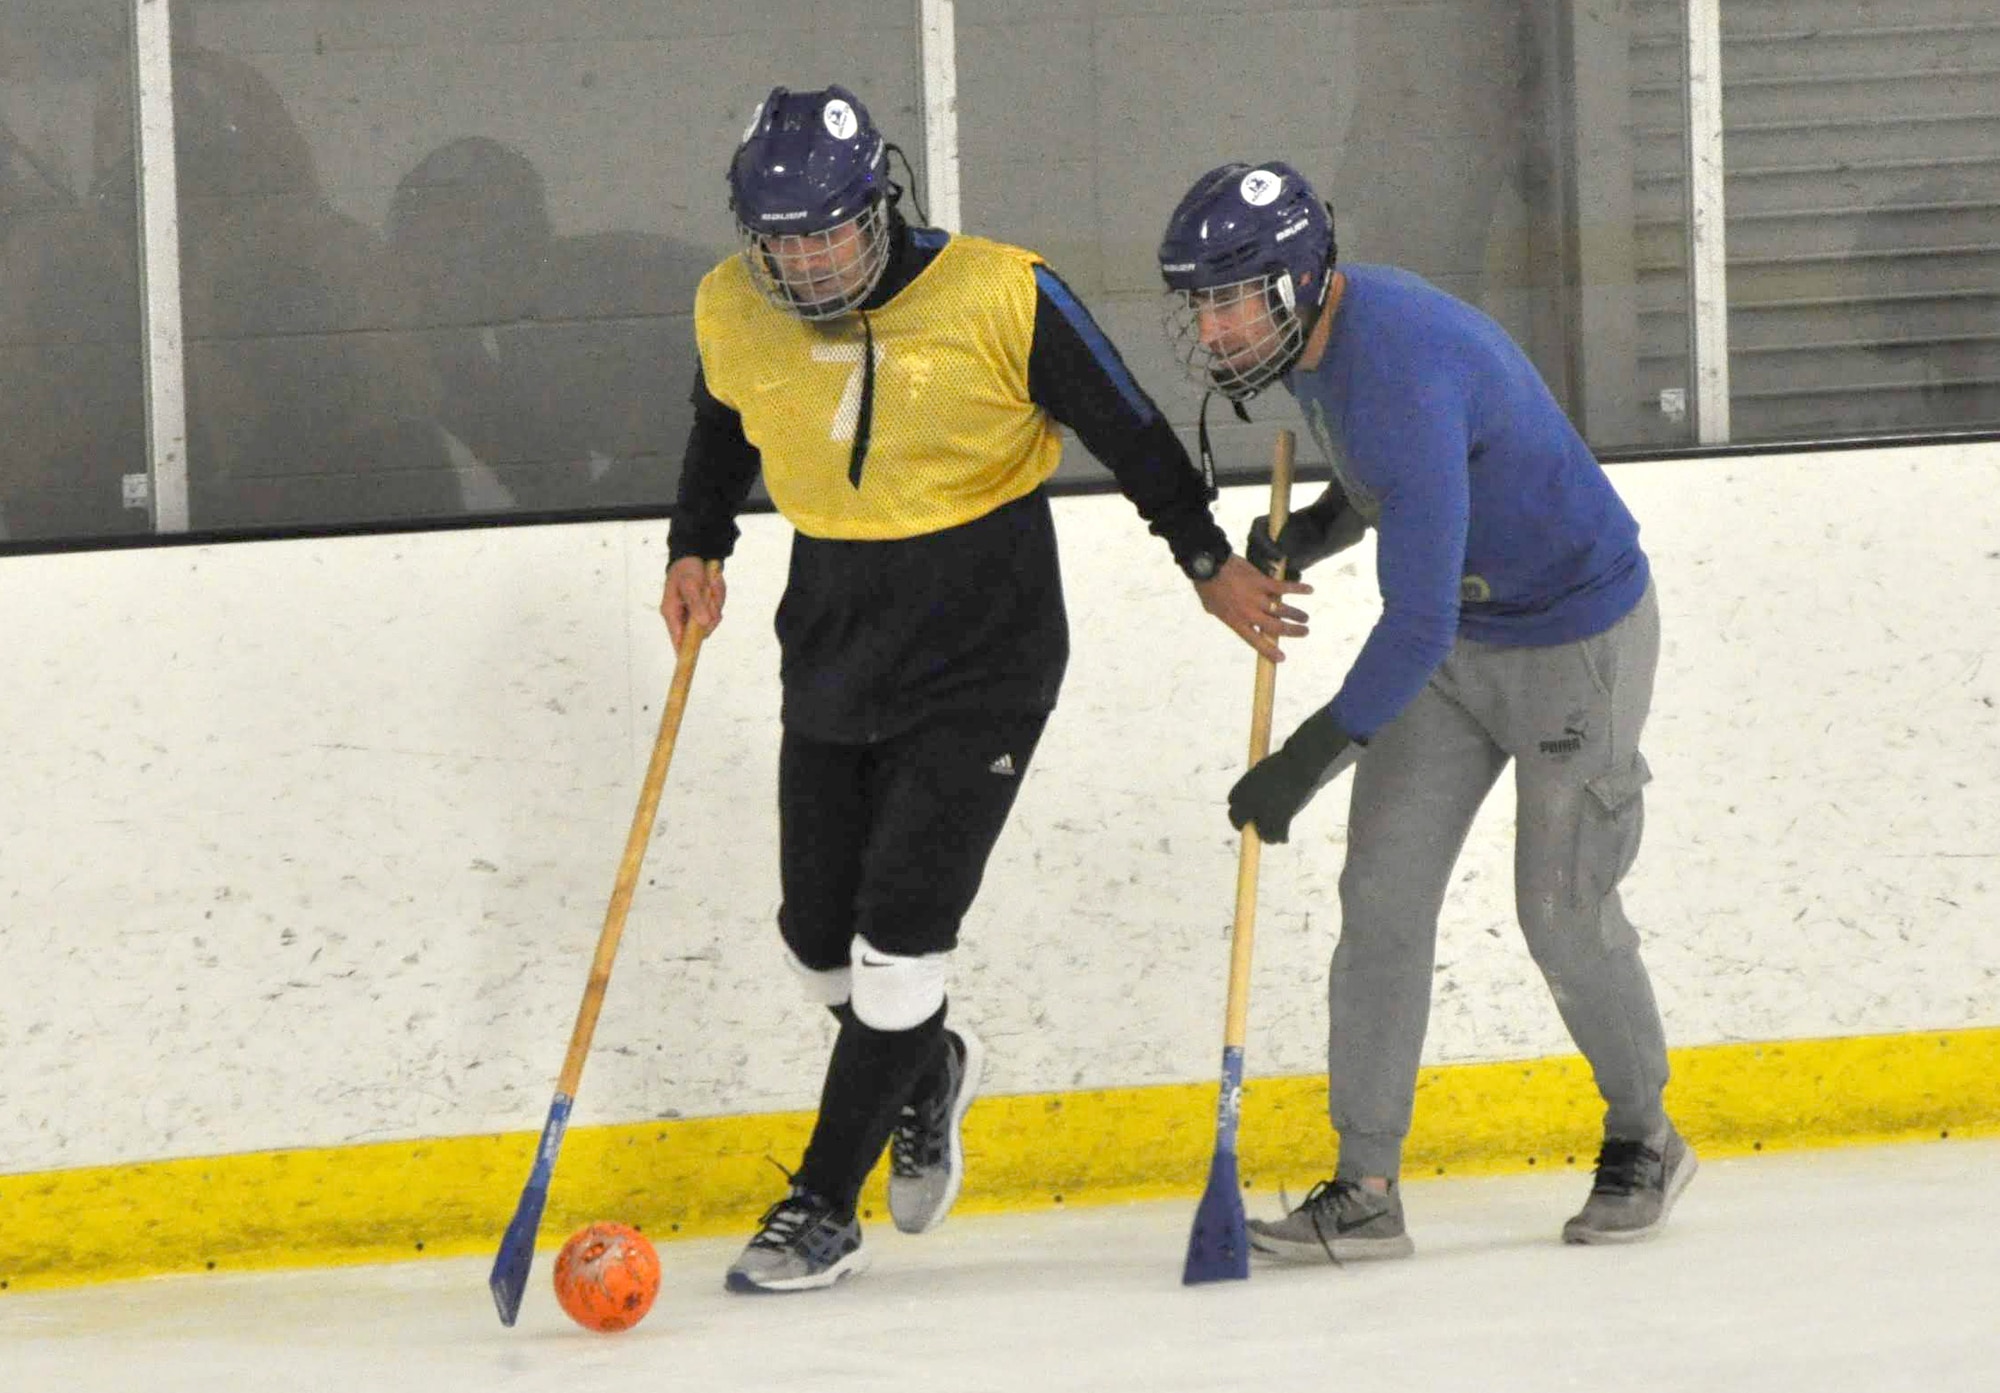 Lt. Col David Manrrique, 38th Reconnaissance Squadron commander, controls the ball as Maj. Nick Christi, 38th RS assistant director of operations, attempts to steal during a game of Broomball June 21, 2019, at Grover Ice Rink, Omaha, Nebraska. This resiliency event was made possible through funds from the Unite Program set up by the Air Force Services Activity earlier this year to promote unit cohesion. The program is the vision of Gen. David L. Goldfein, Air Force chief of staff, who recognized the need to take care of our squadrons by allowing units to focus on resiliency and cohesion for its members.